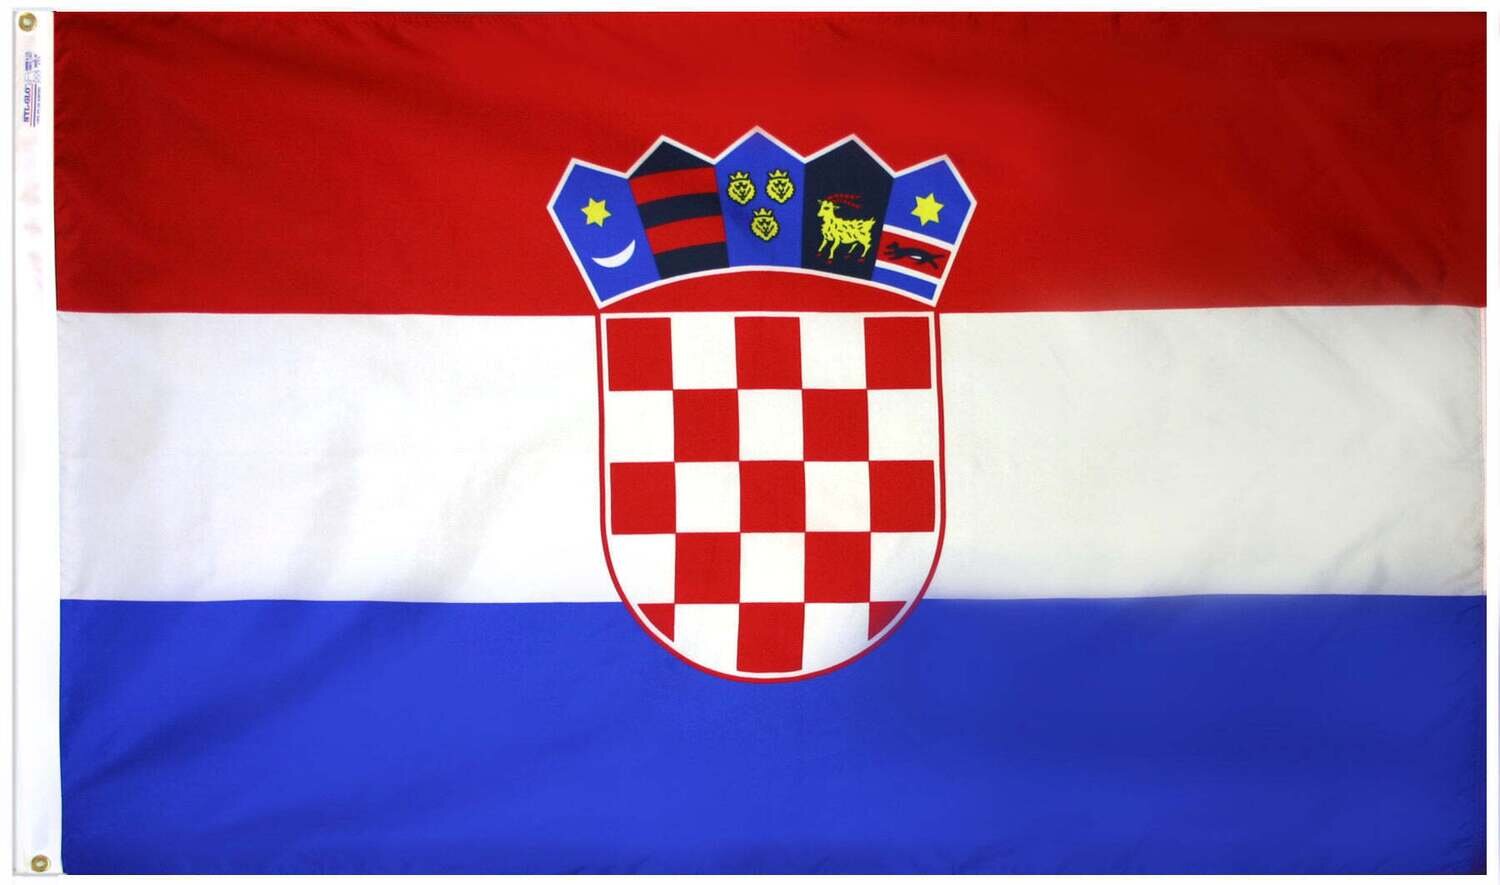 Croatia Flag 3x5 ft. Nylon SolarGuard Nyl-Glo 100% Made in USA to Official United Nations Design Specifications.